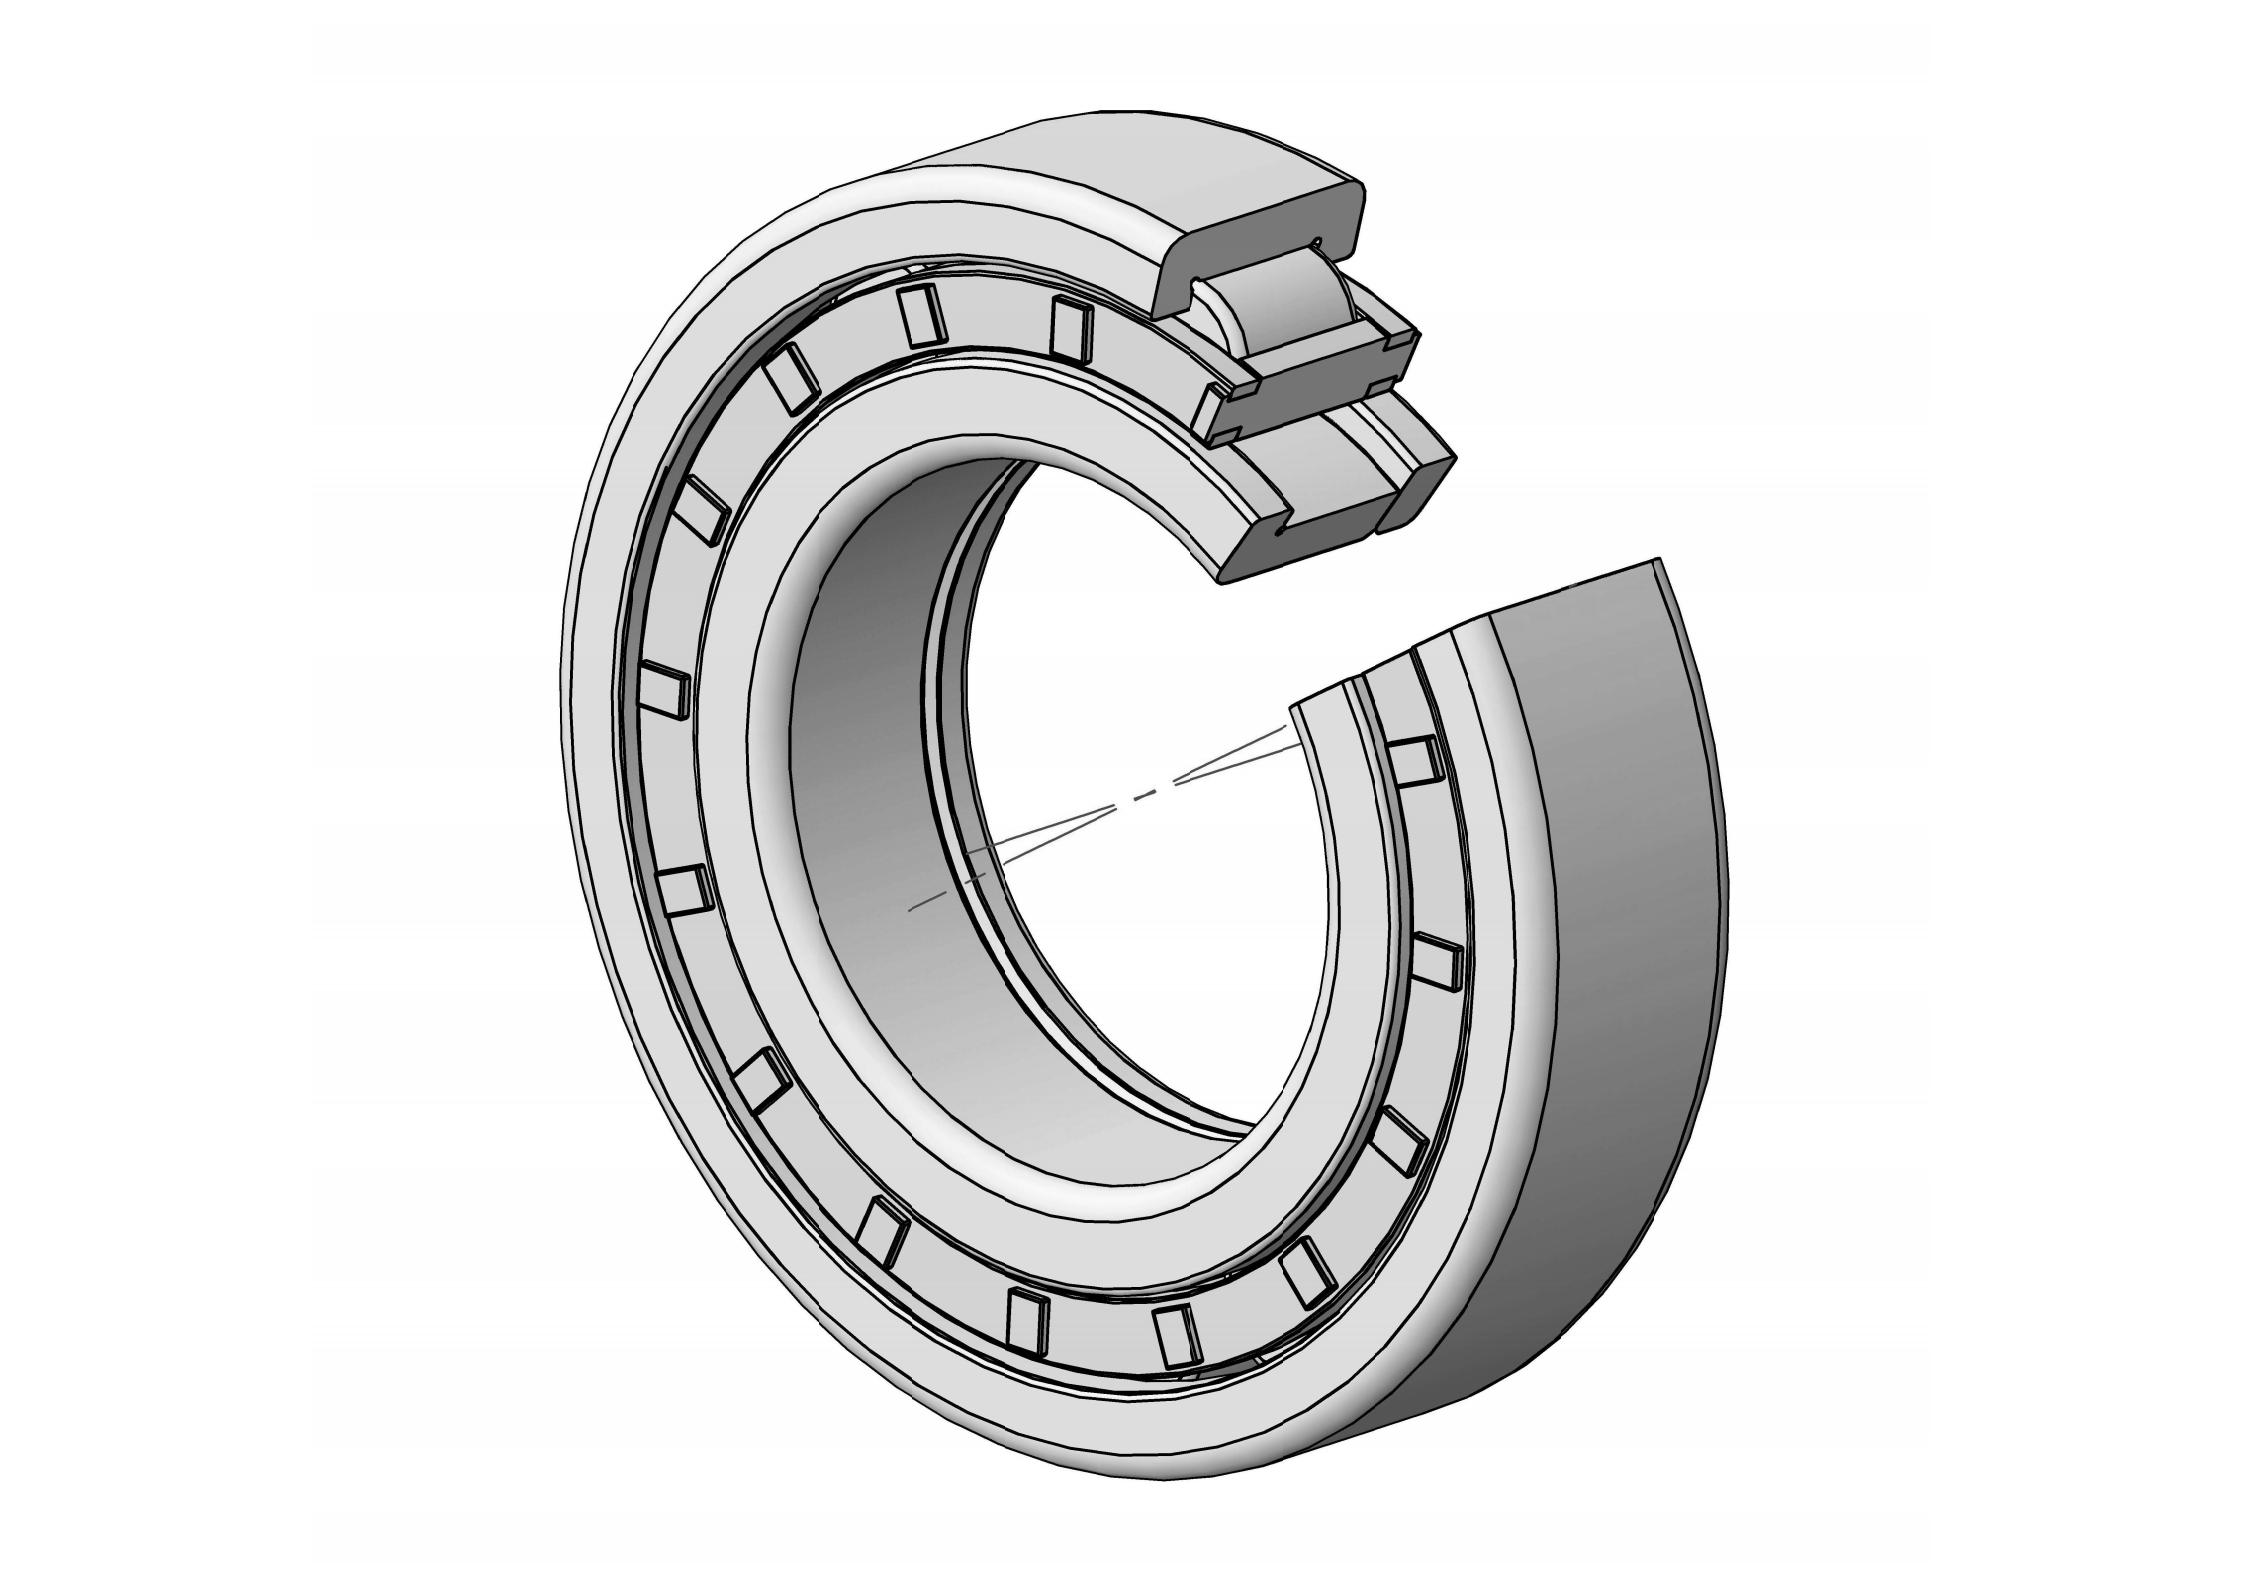 NUP2210-E Single Row Cylindrical roller bearing 